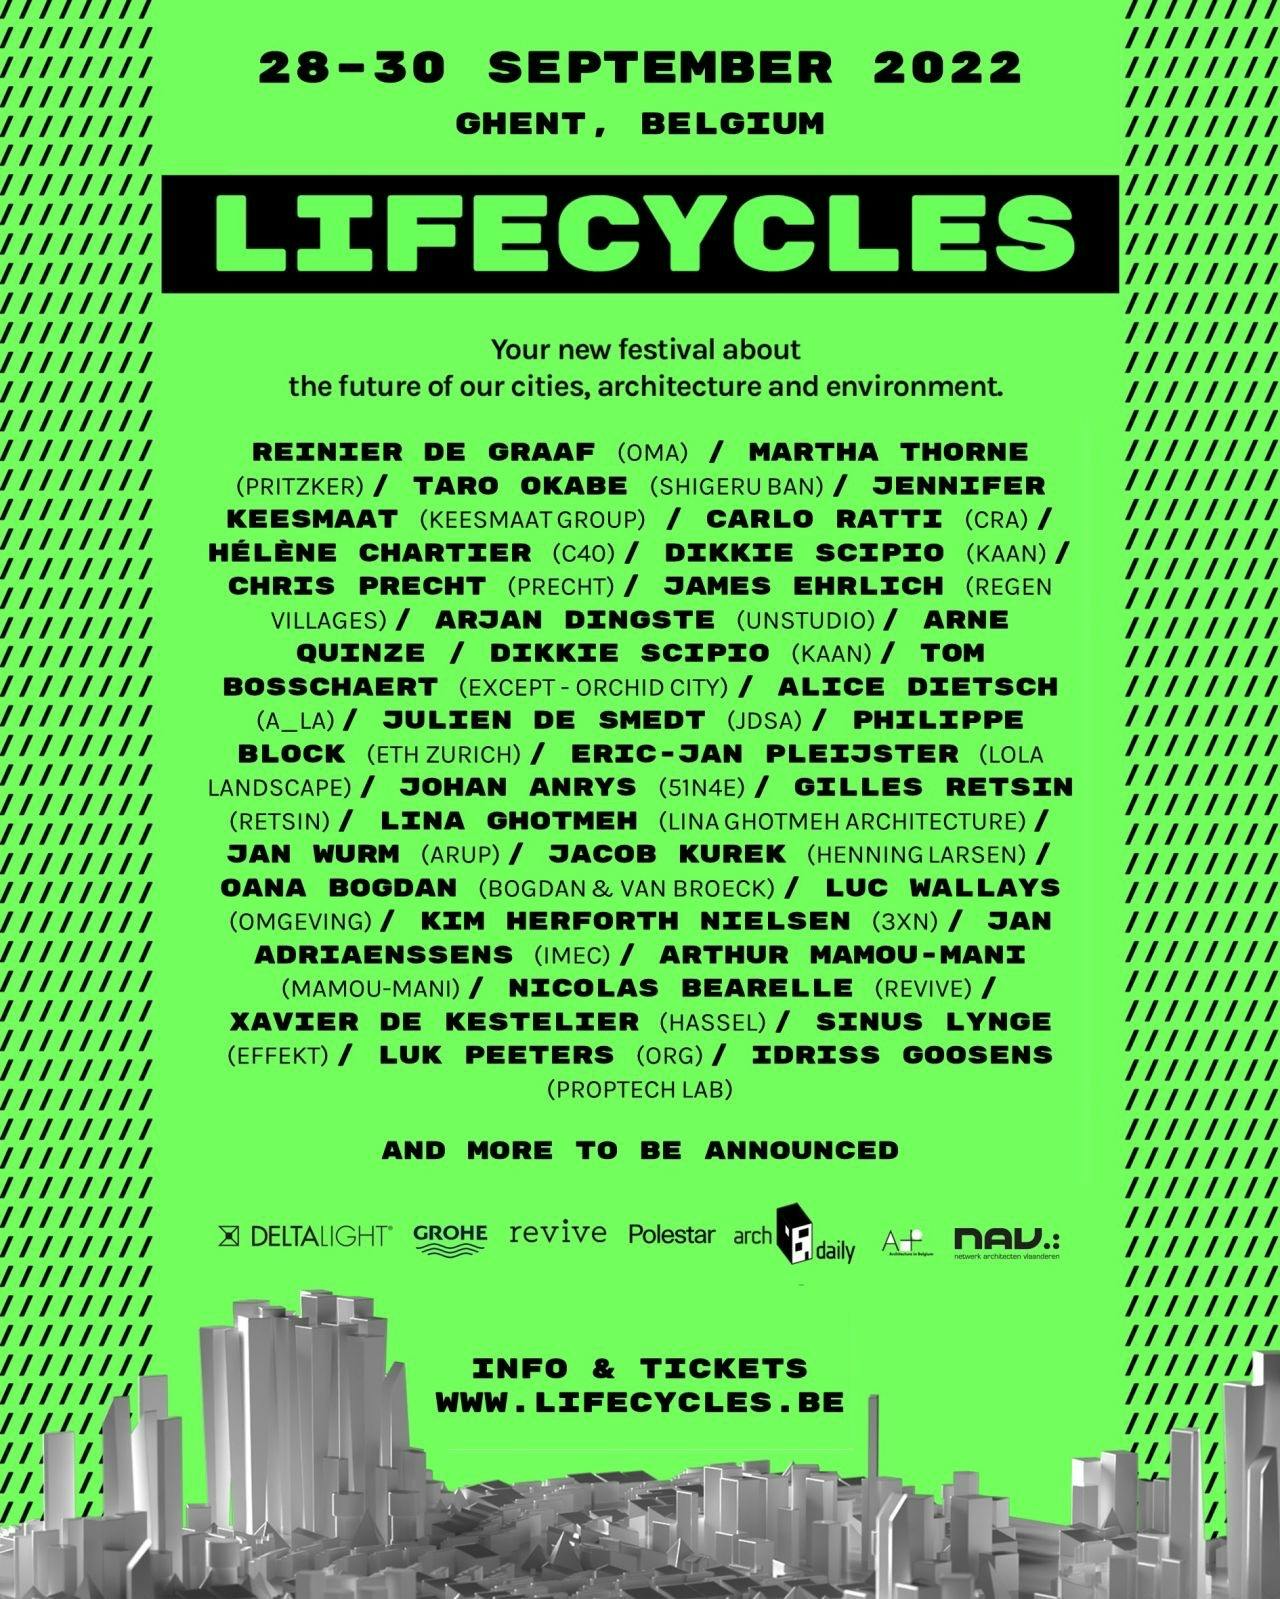 Lifecycles event poster